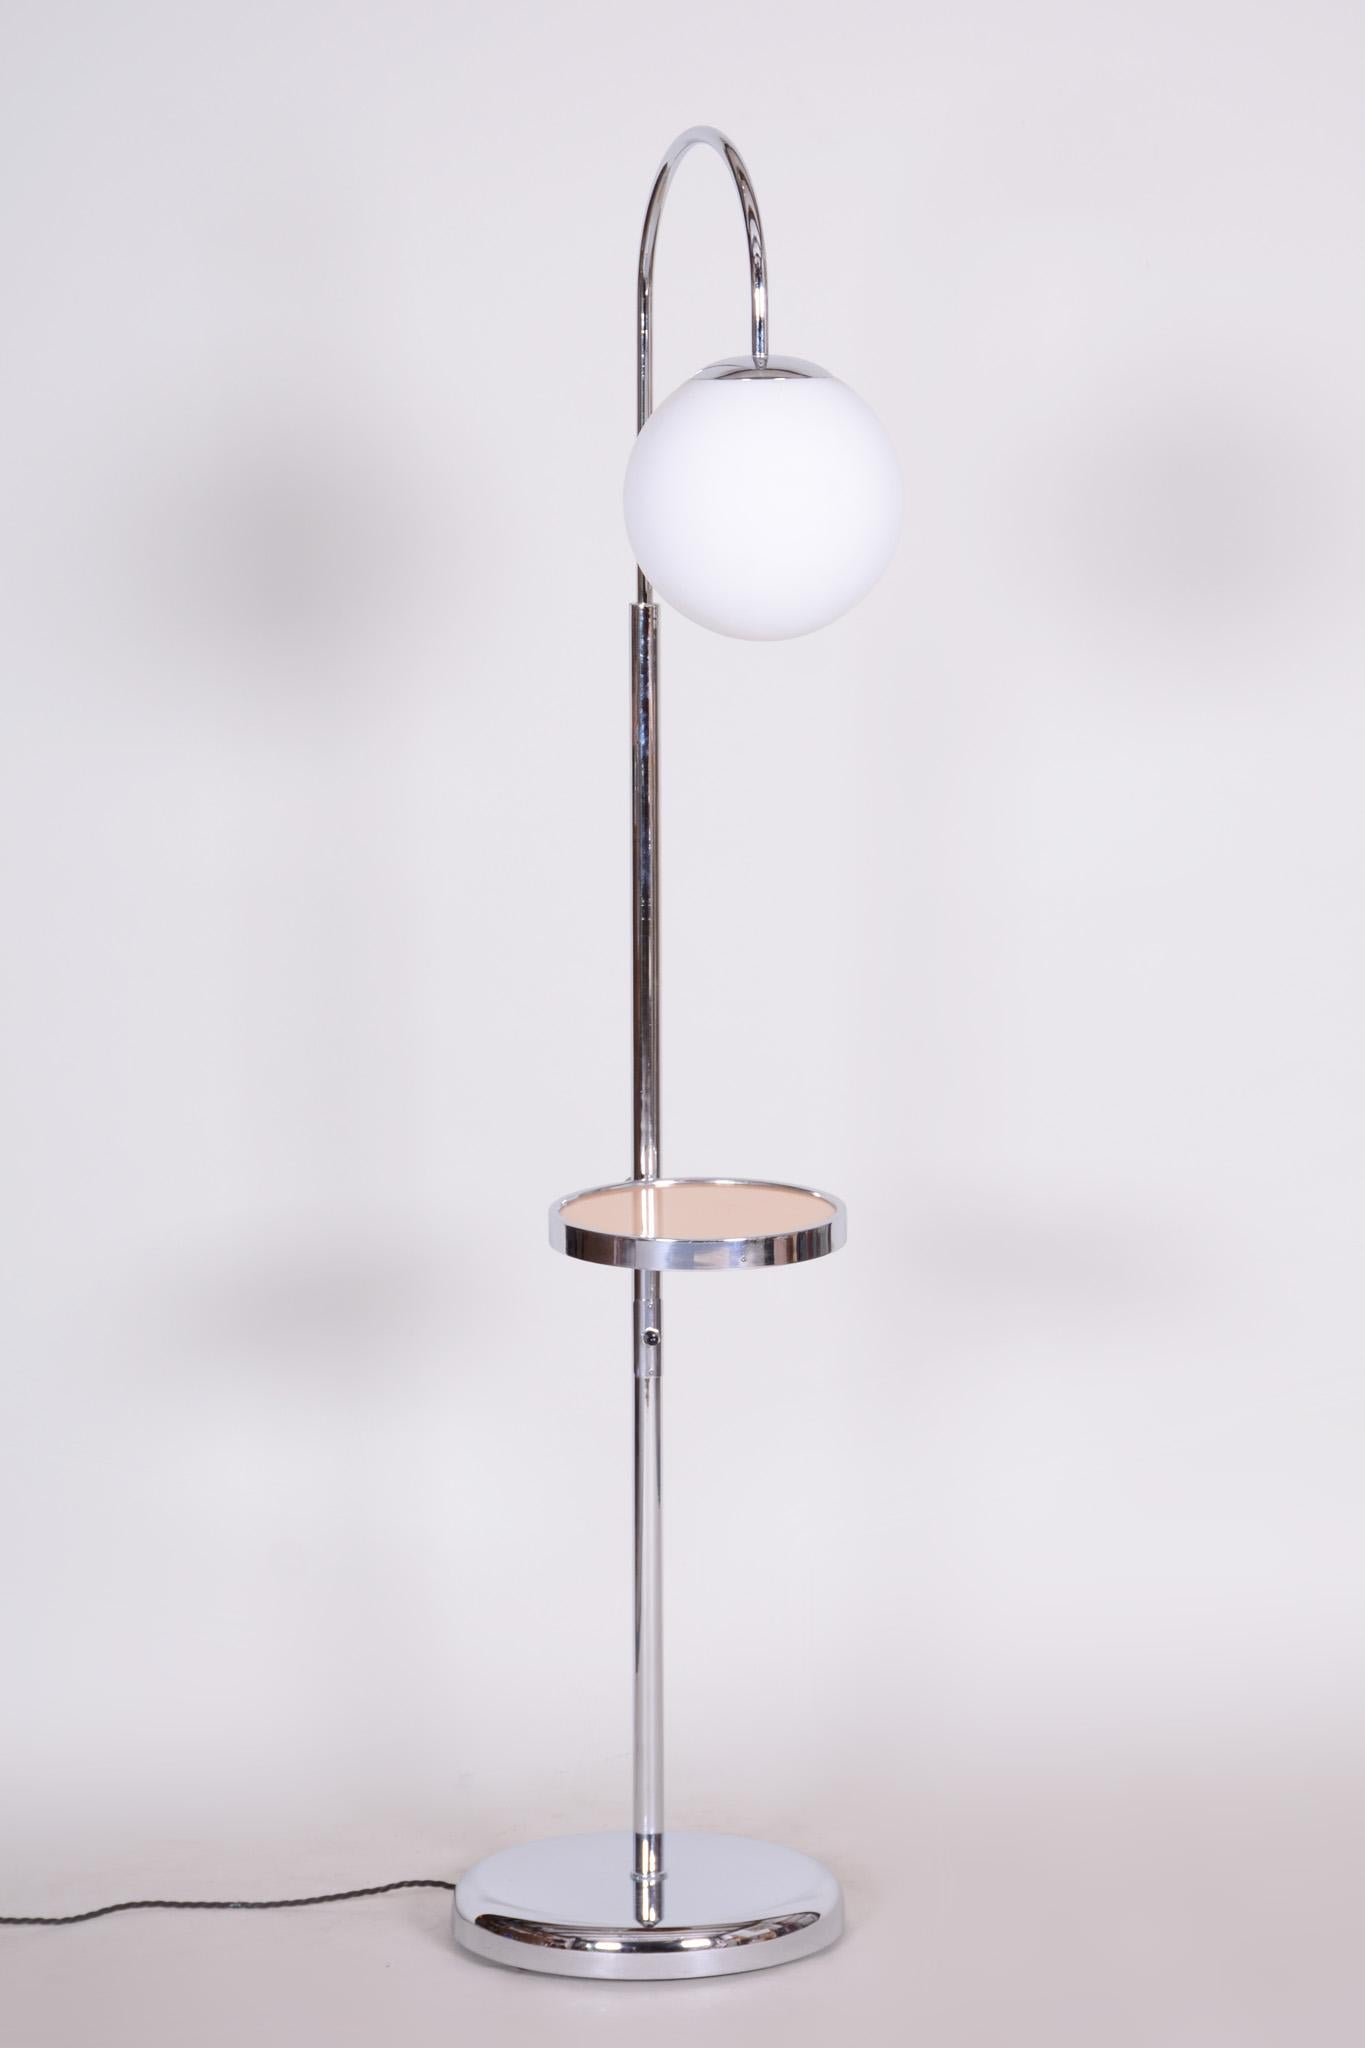 Early 20th Century Chrome Floor Lamp, Milk Glass, New Electrification, 1930s For Sale 2